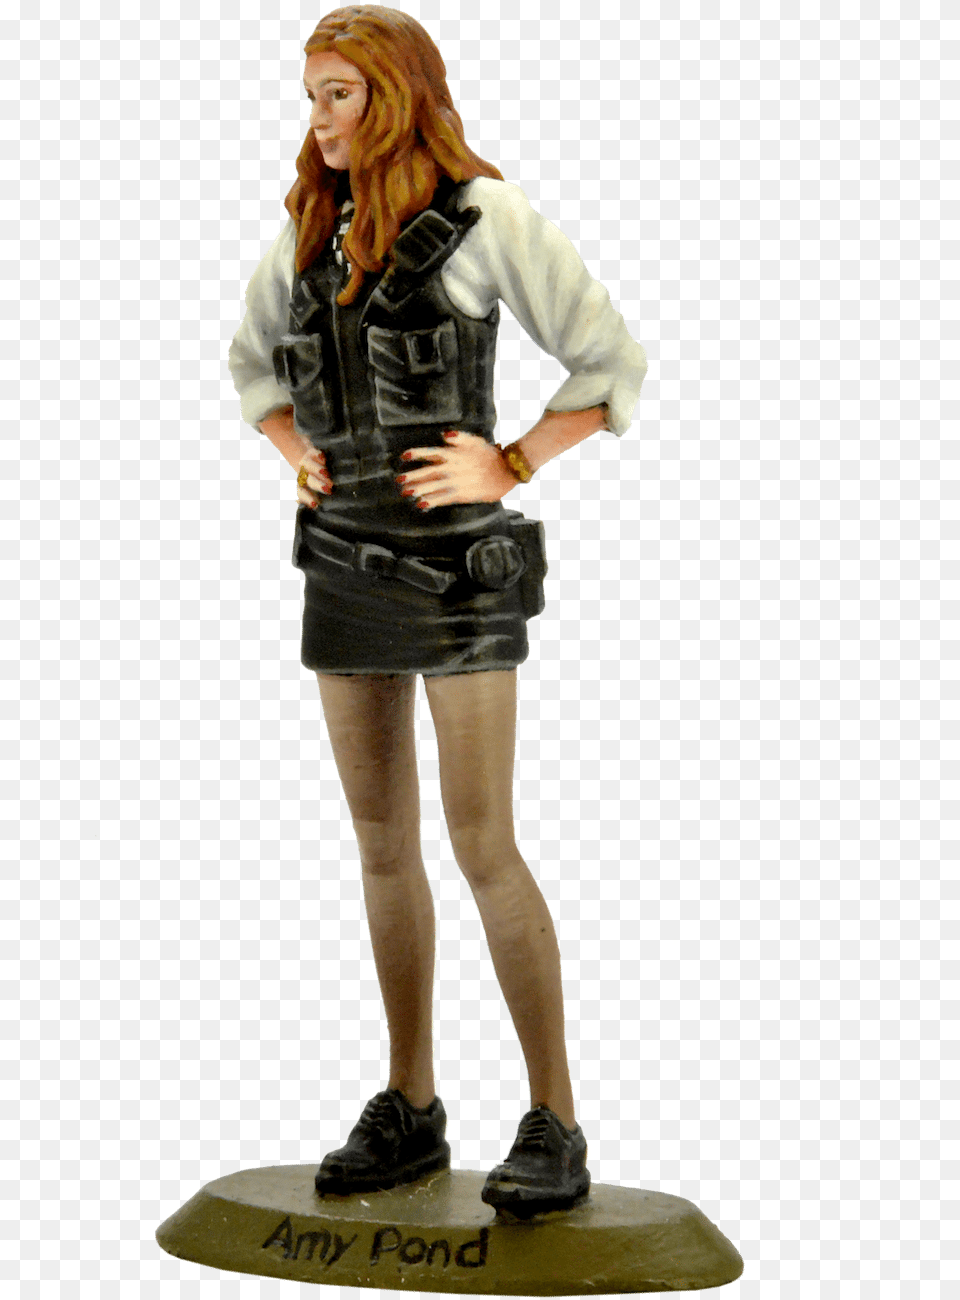 Amy Pond, Adult, Skirt, Person, Woman Png